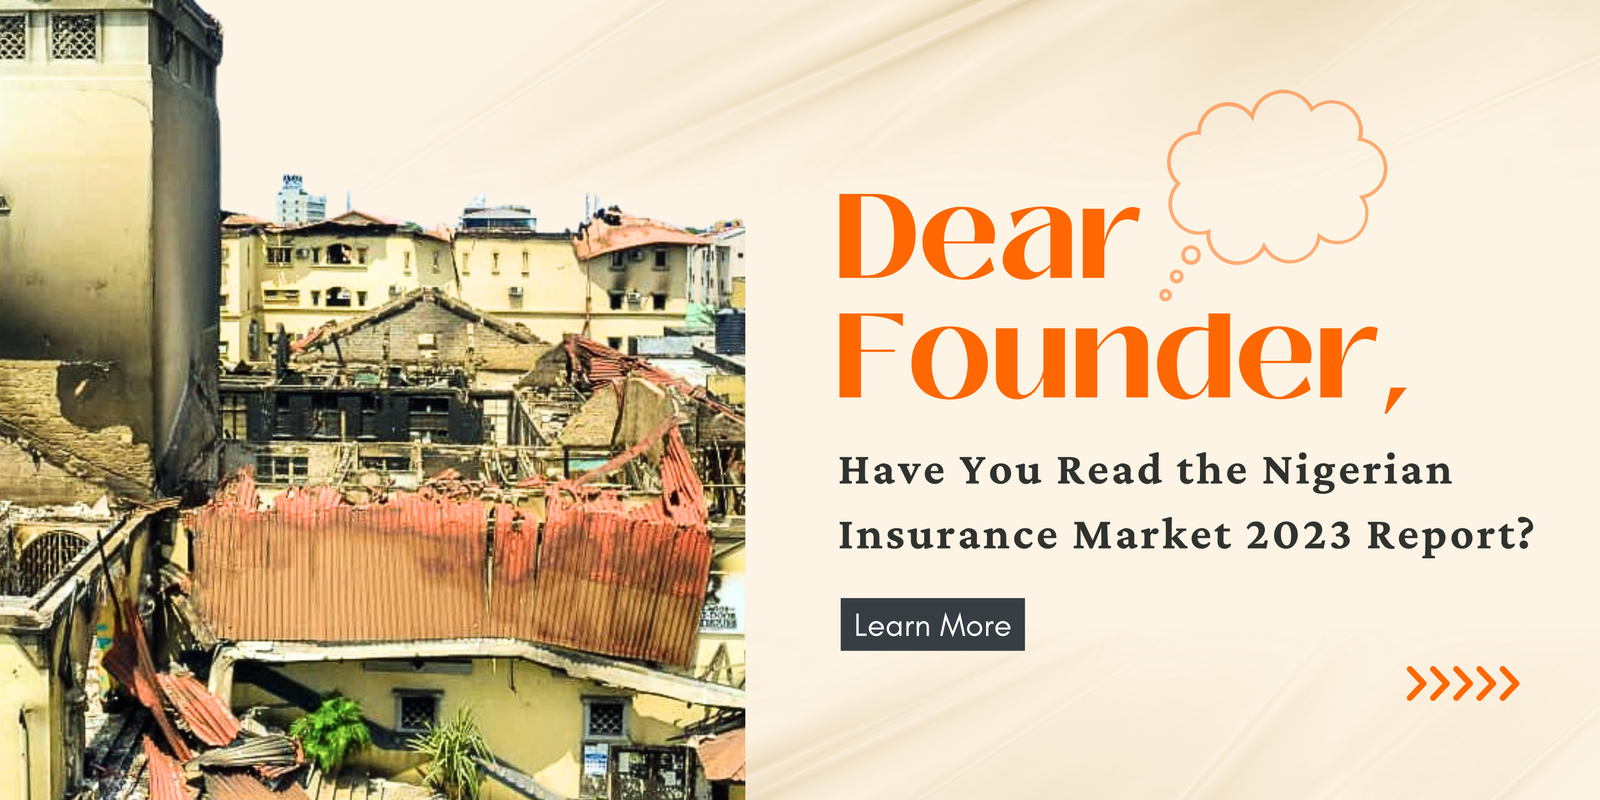 Nigerian Insurance Market 2023 Report: Lessons for African Founders and Businesses